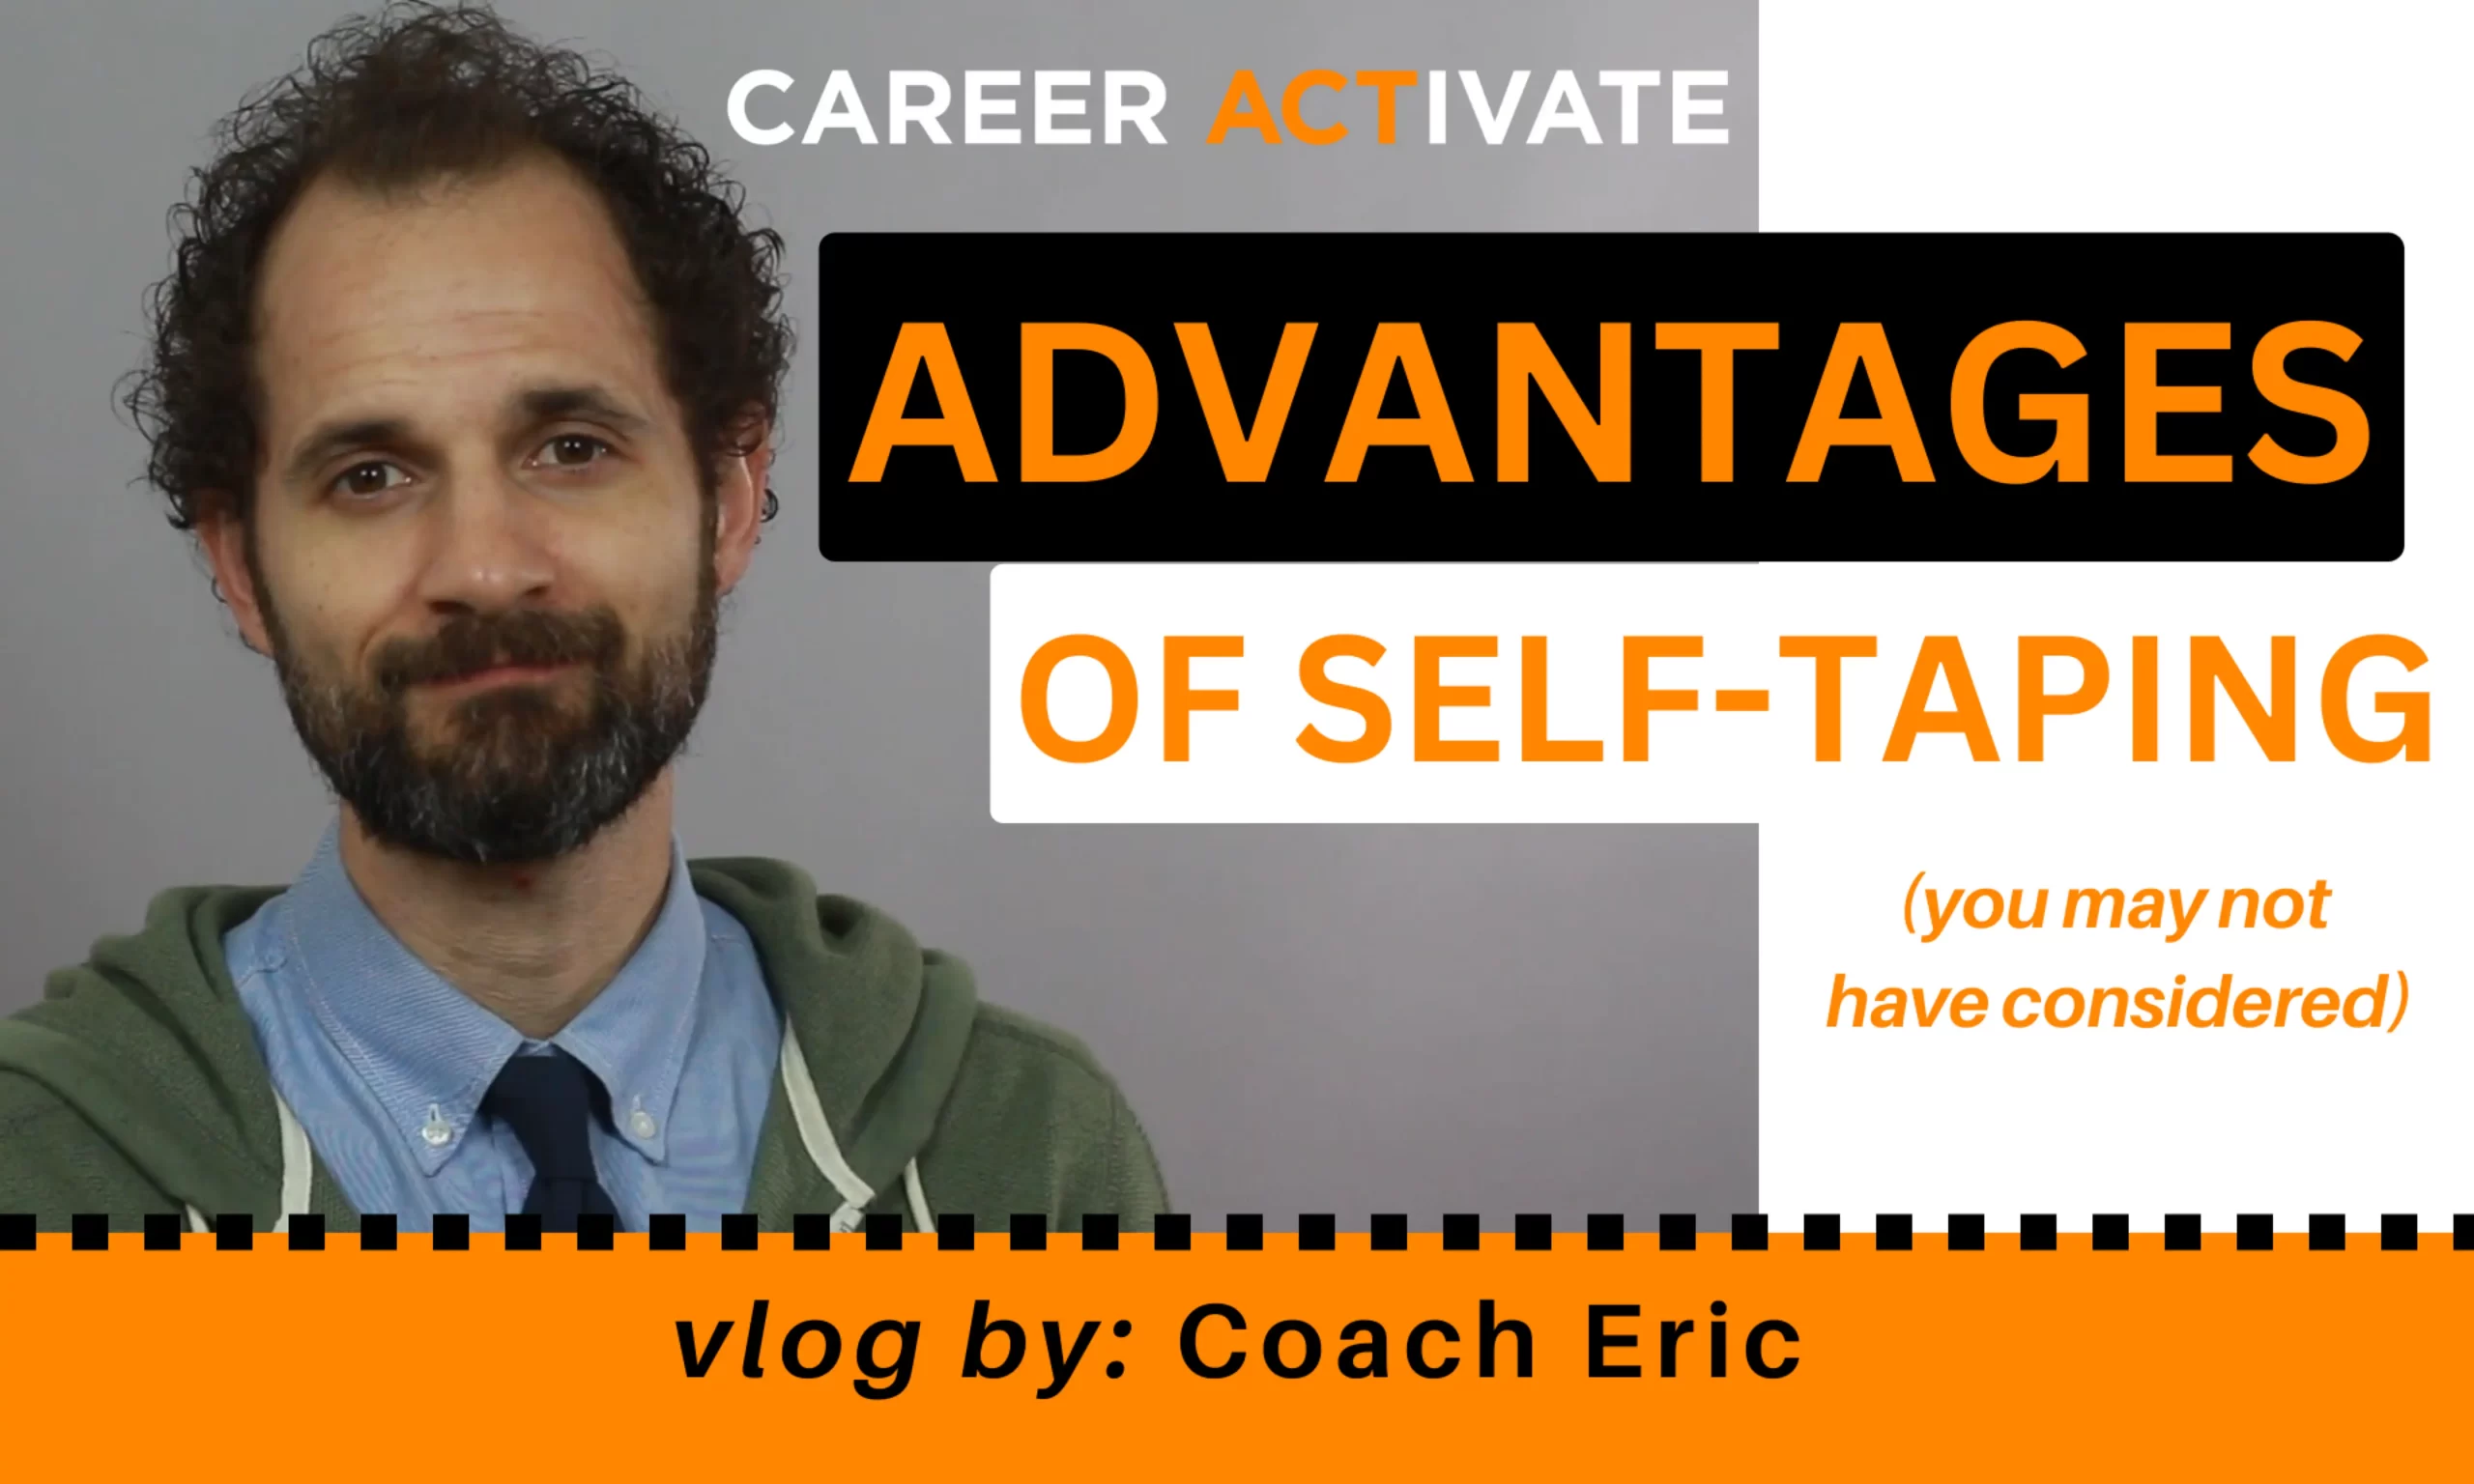 Top 3 Advantages of Self-Taping You Hadn’t Considered